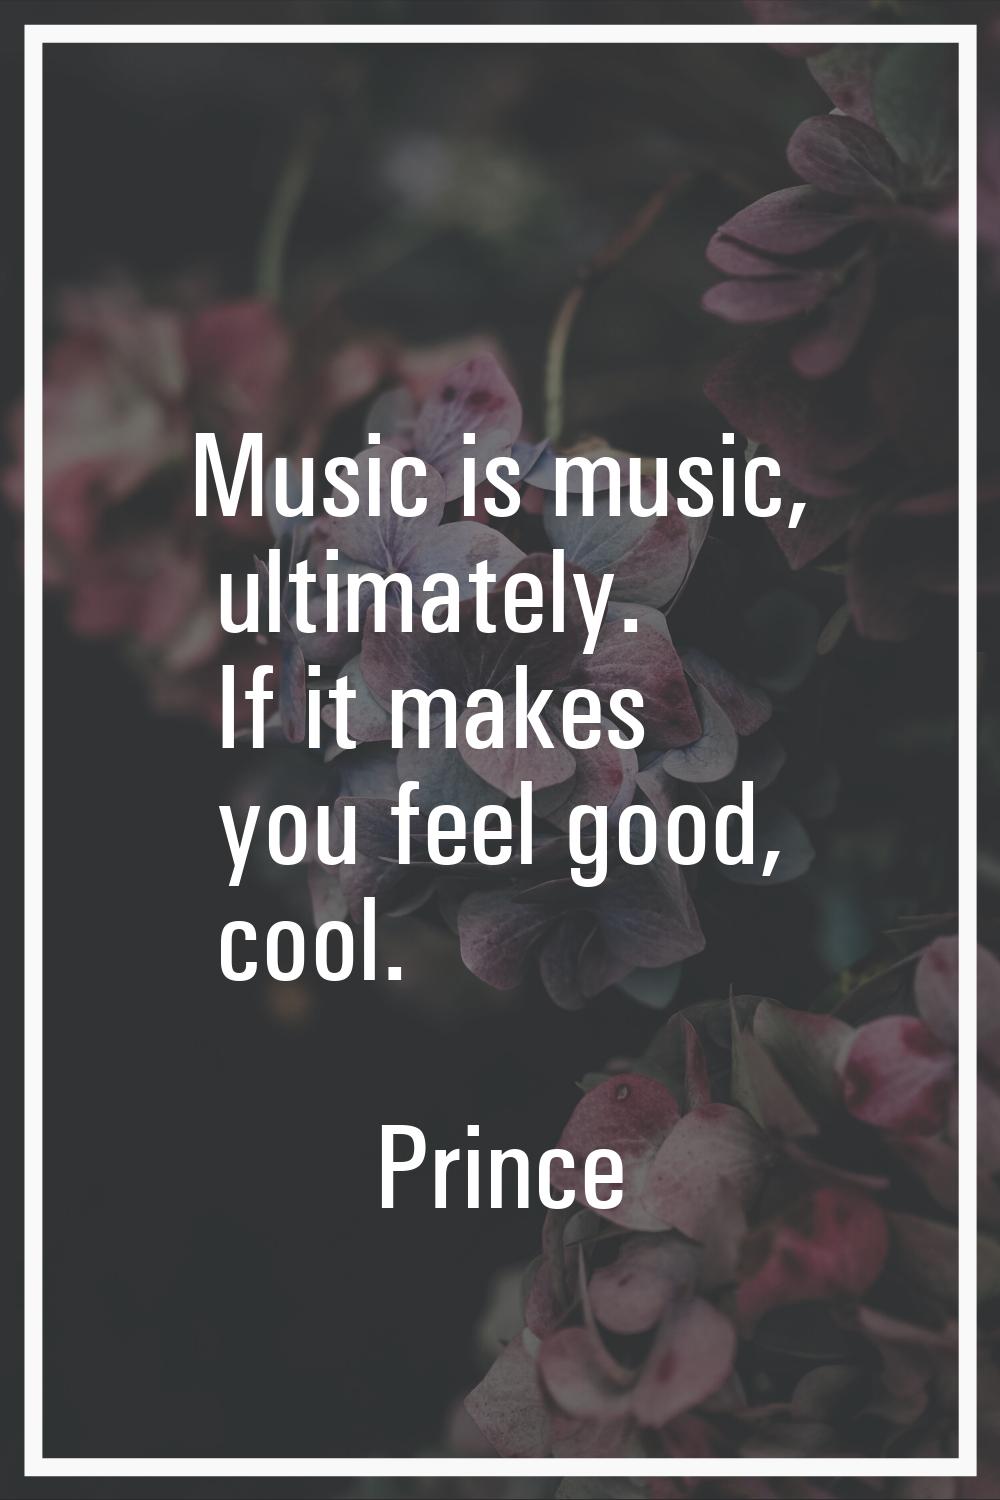 Music is music, ultimately. If it makes you feel good, cool.